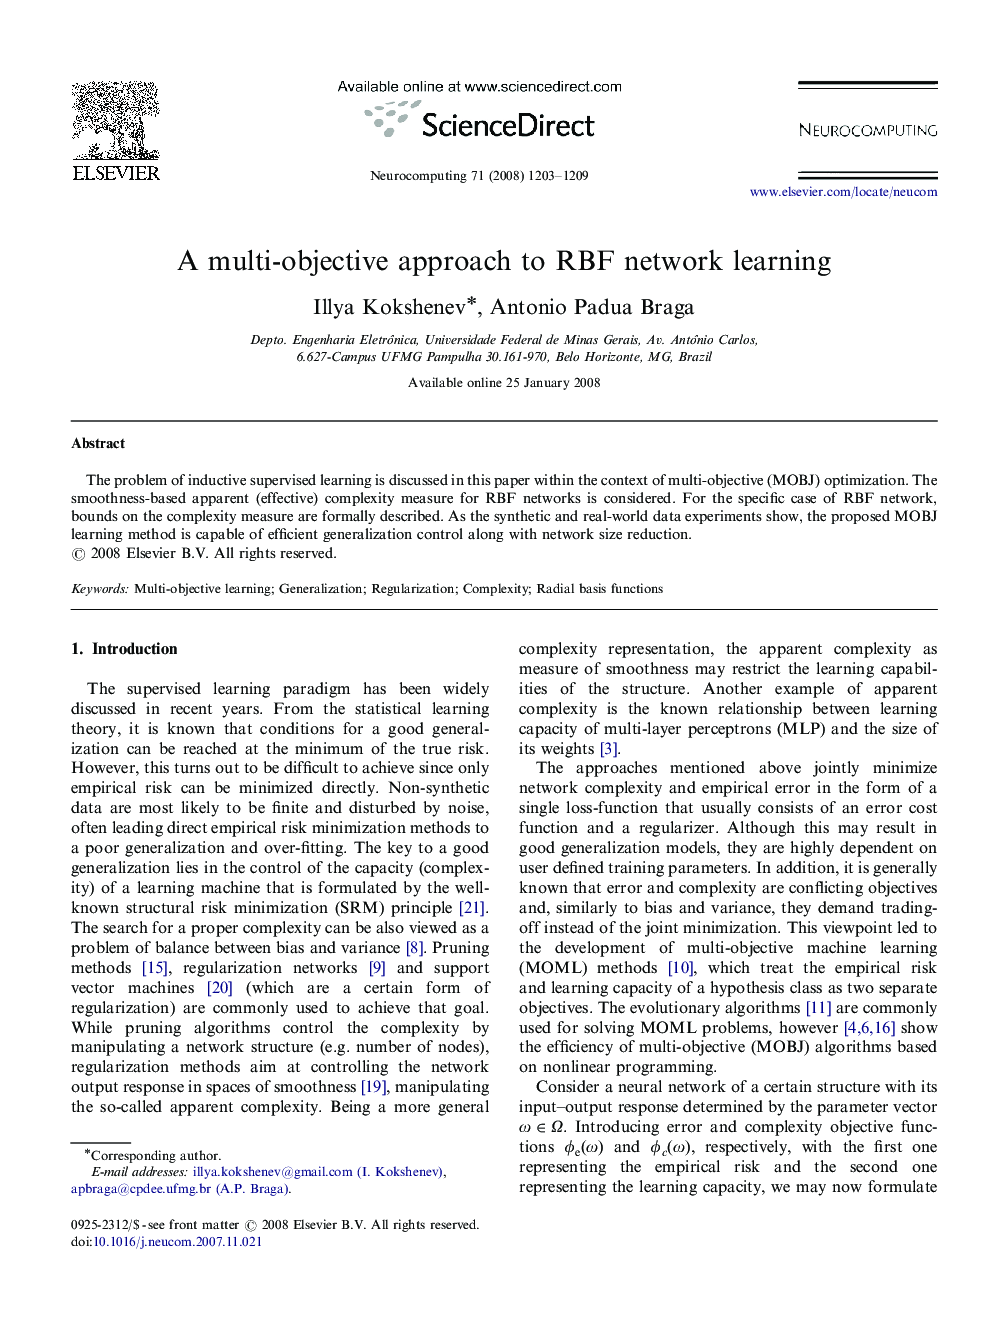 A multi-objective approach to RBF network learning